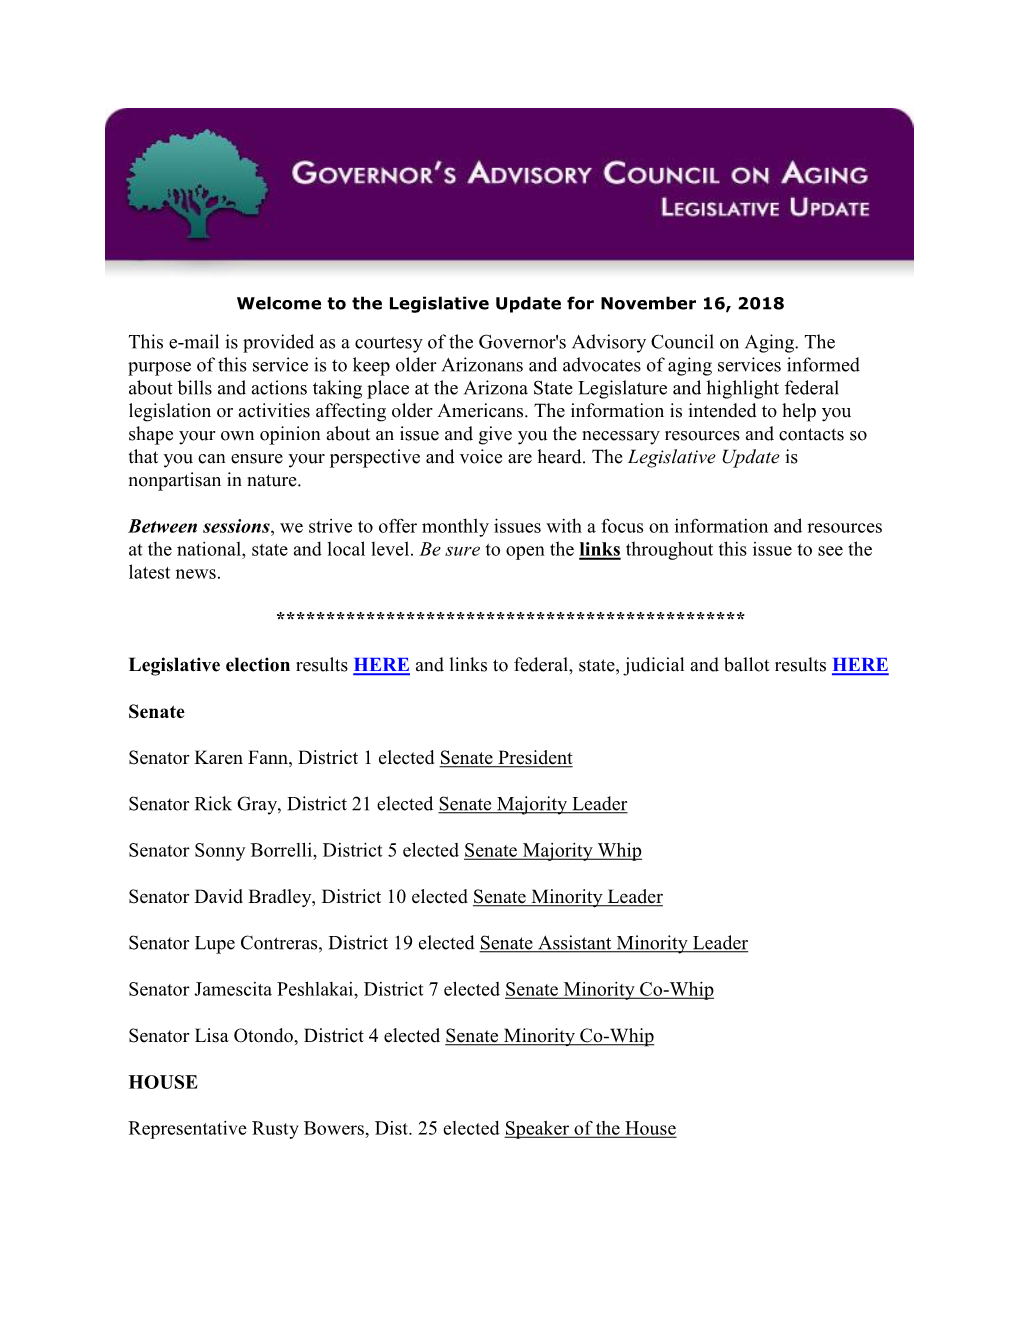 This E-Mail Is Provided As a Courtesy of the Governor's Advisory Council on Aging